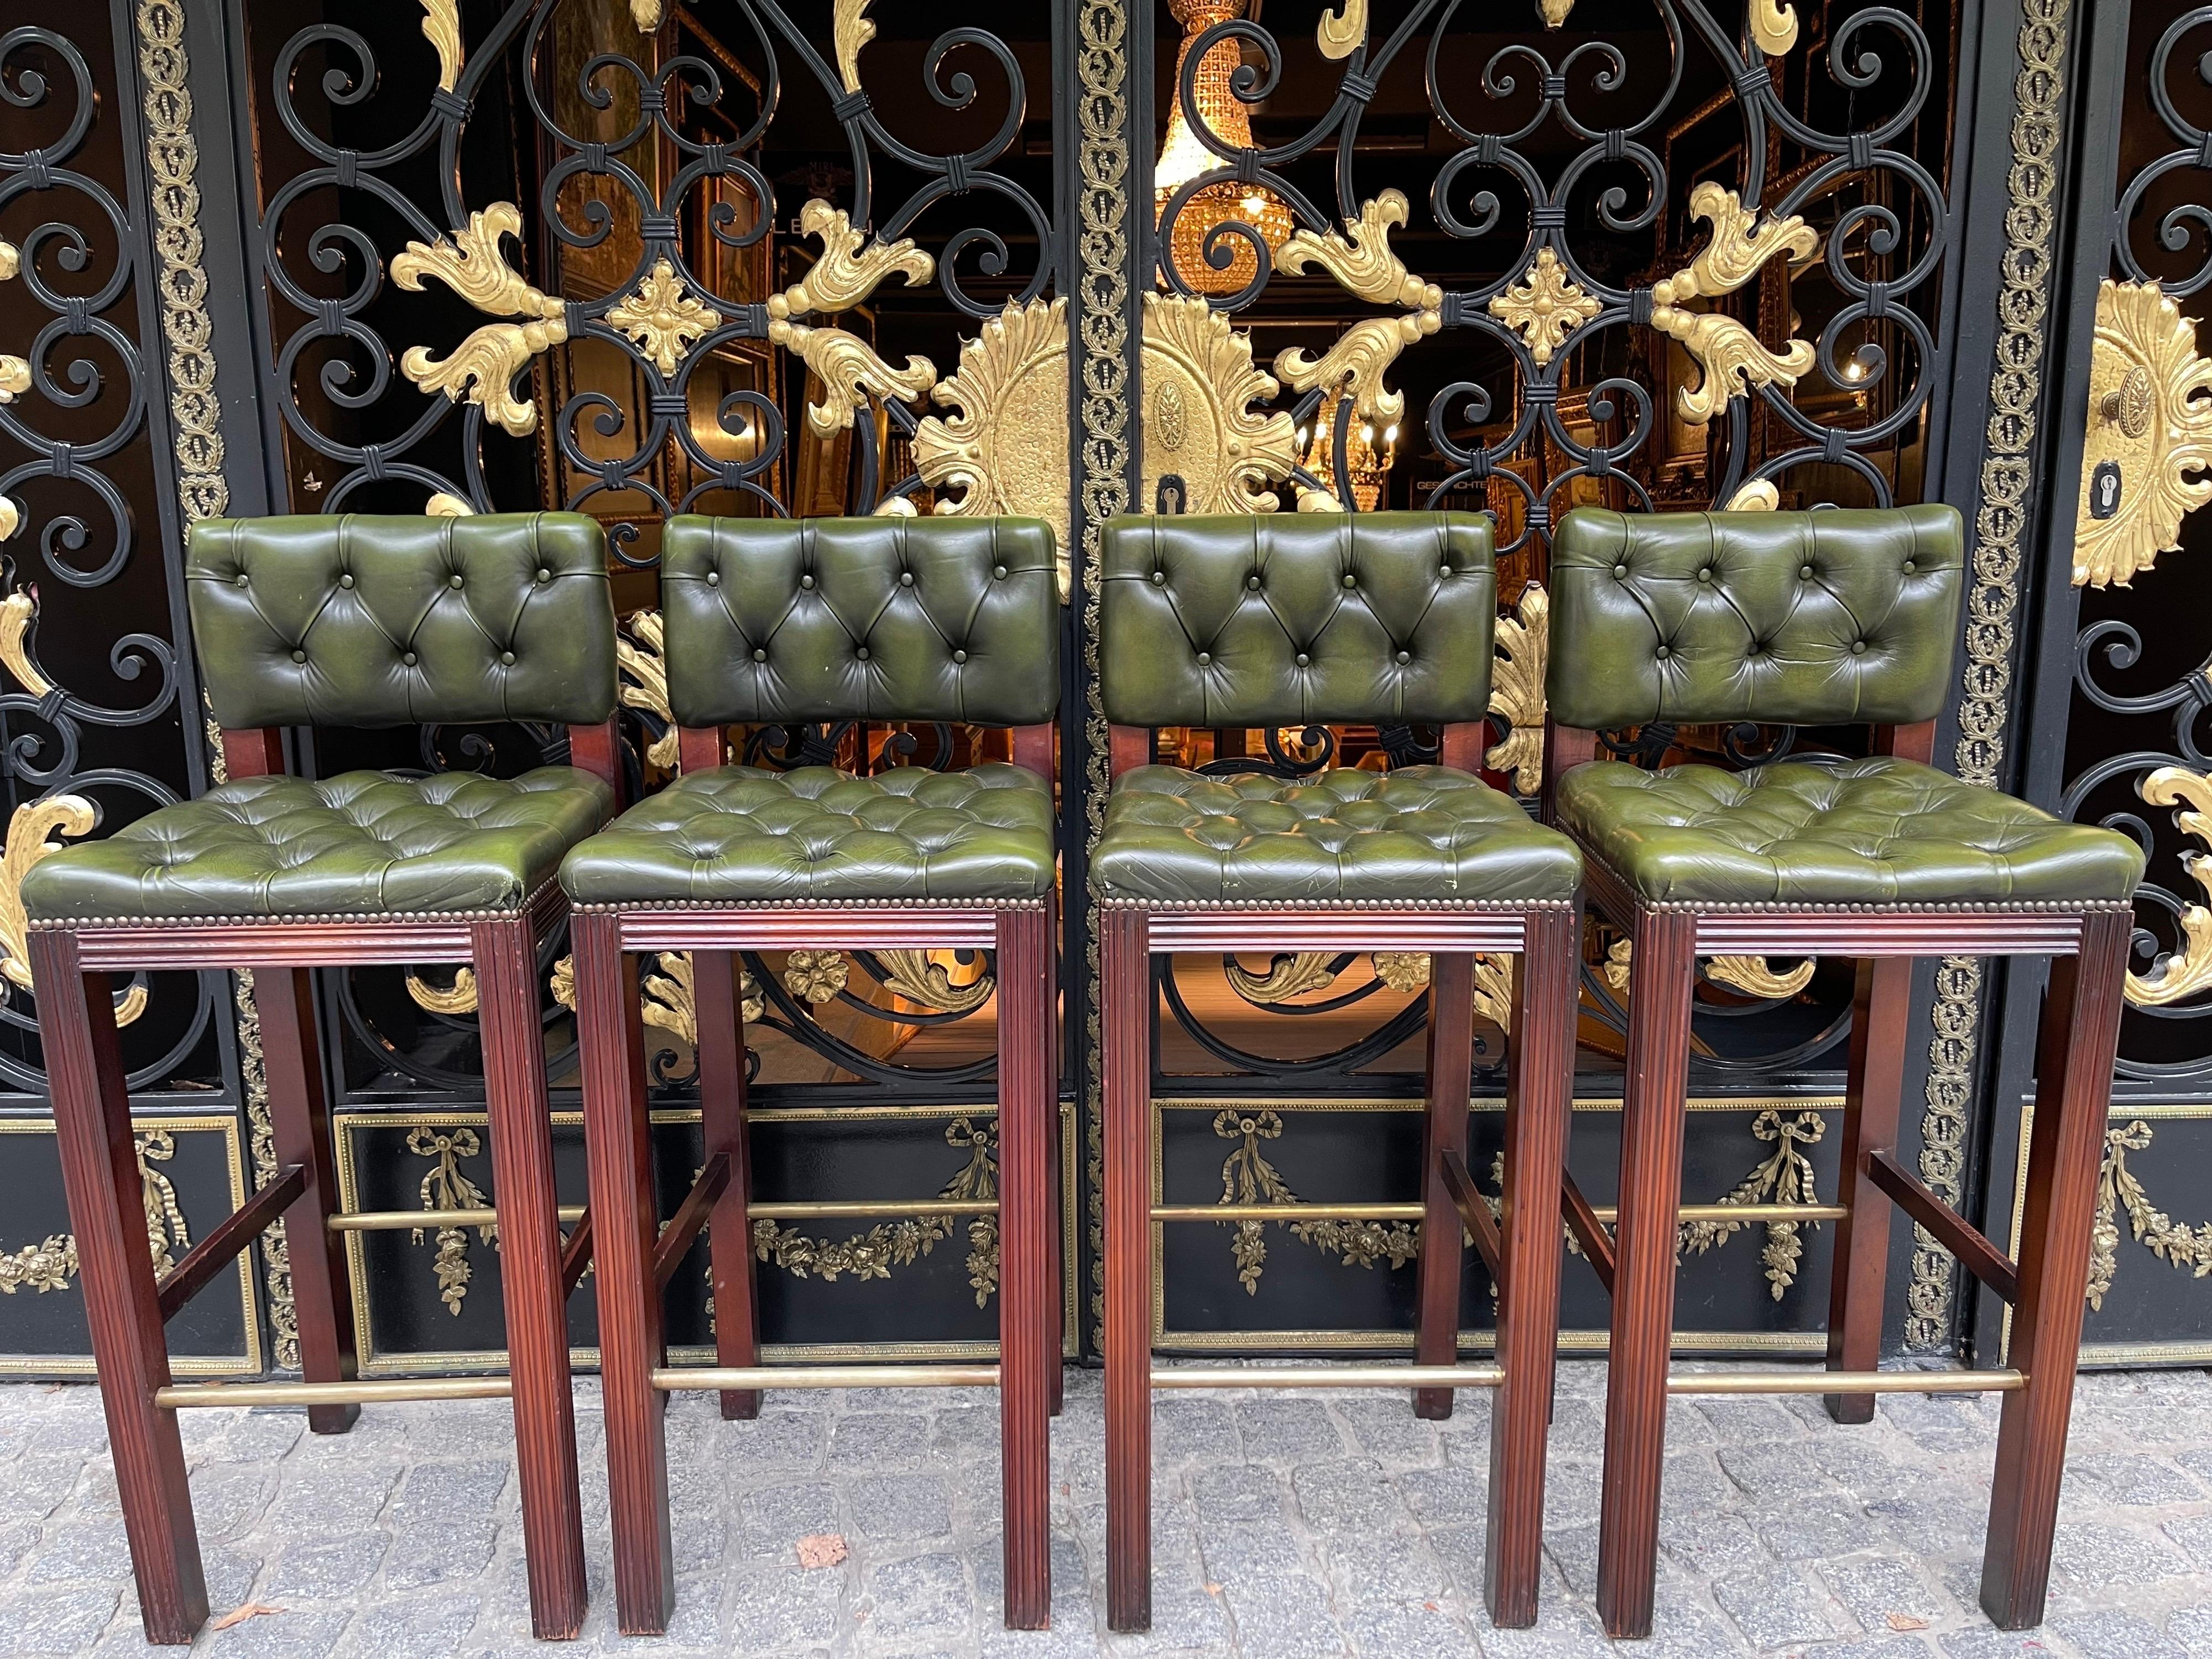 Set of 4 English Chesterfield bar stools, 20th Century

4 Exclusive Chesterfield bar stools, England. Wooden bridge made of solid wood, grooved, connected with brass footrests.

High quality made from real green leather.